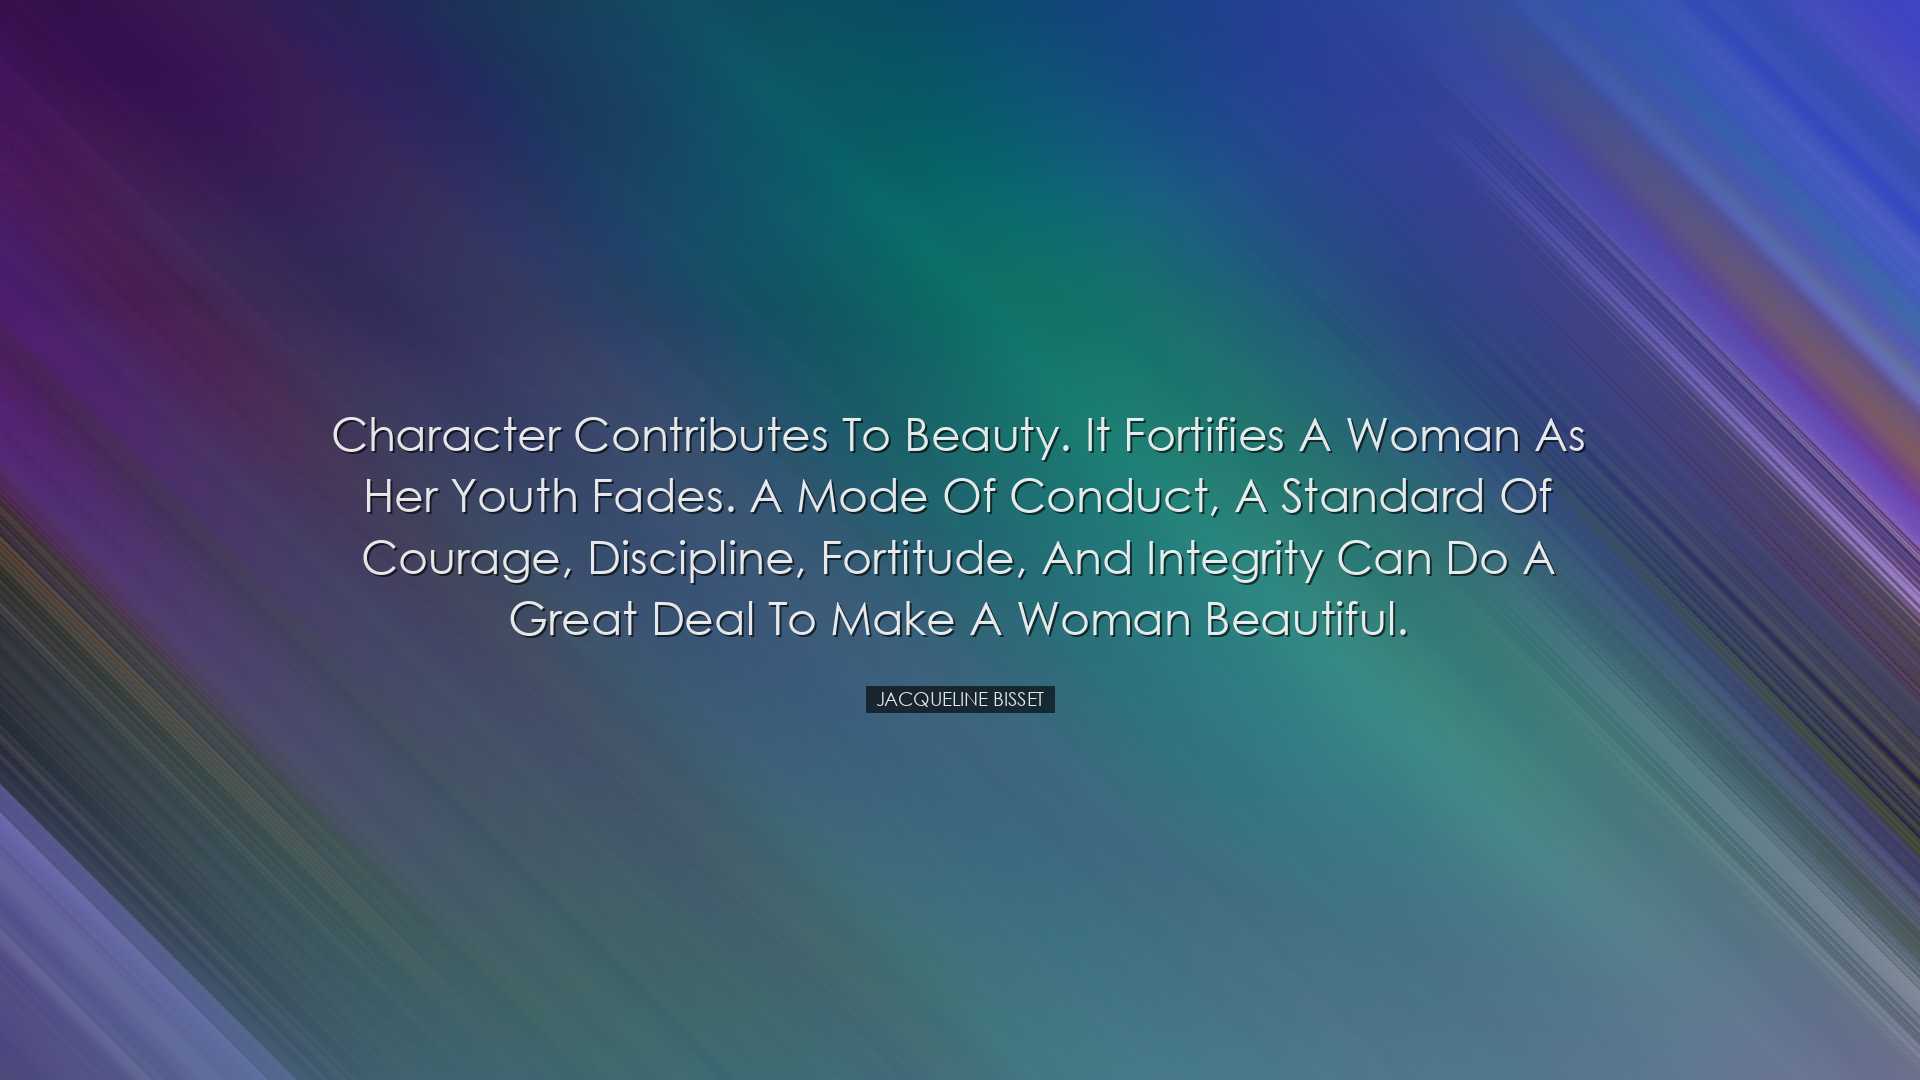 Character contributes to beauty. It fortifies a woman as her youth